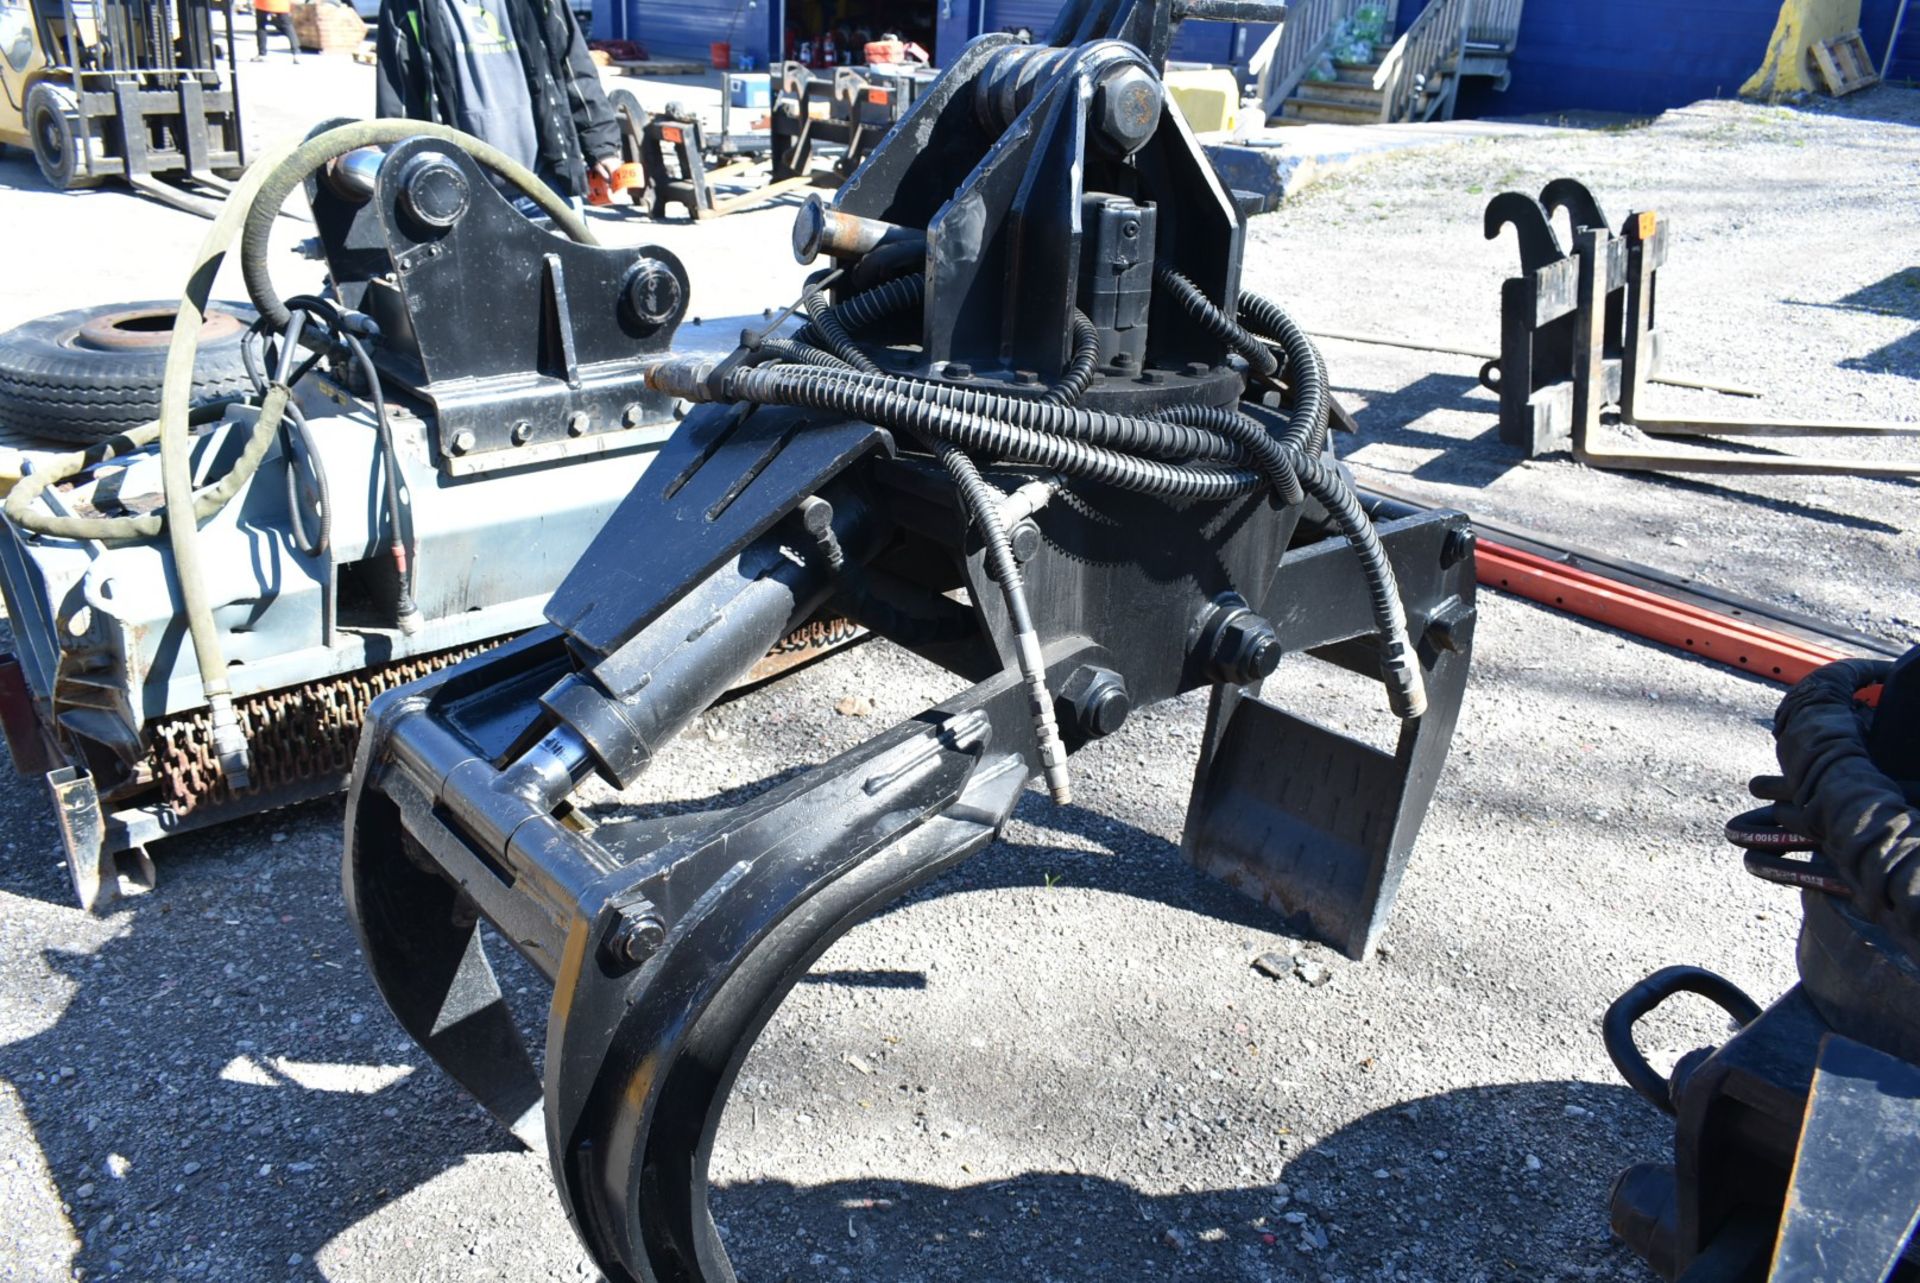 SERCO 680A899 HYDRAULIC EXCAVATOR GRAPPLE ATTACHMENT WITH 3,200 LB. CAPACITY, S/N: G-7981 - Image 2 of 4